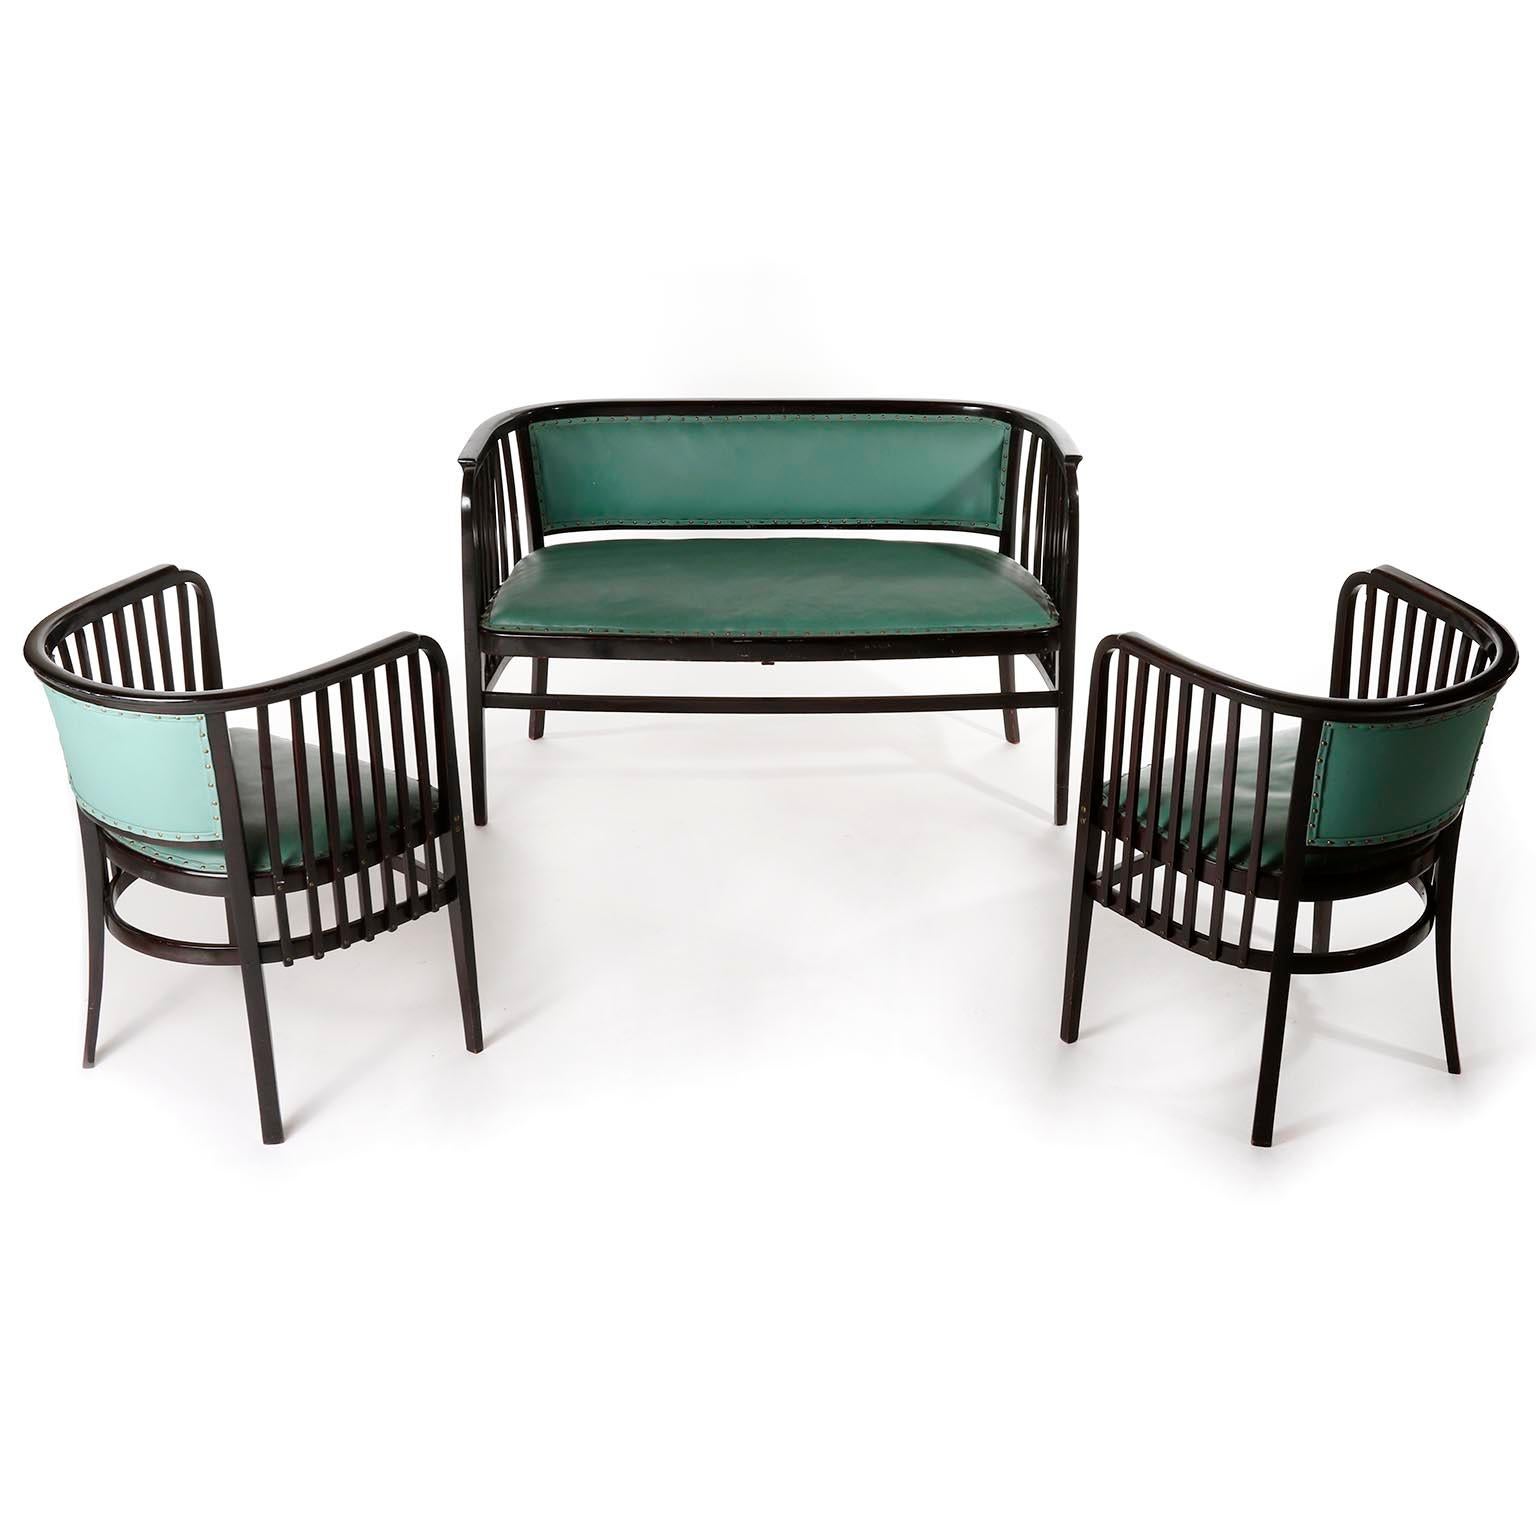 Pair of Armchairs Chairs Marcel Kammerer, Thonet, Turquoise Green Leather, 1910 In Good Condition For Sale In Hausmannstätten, AT